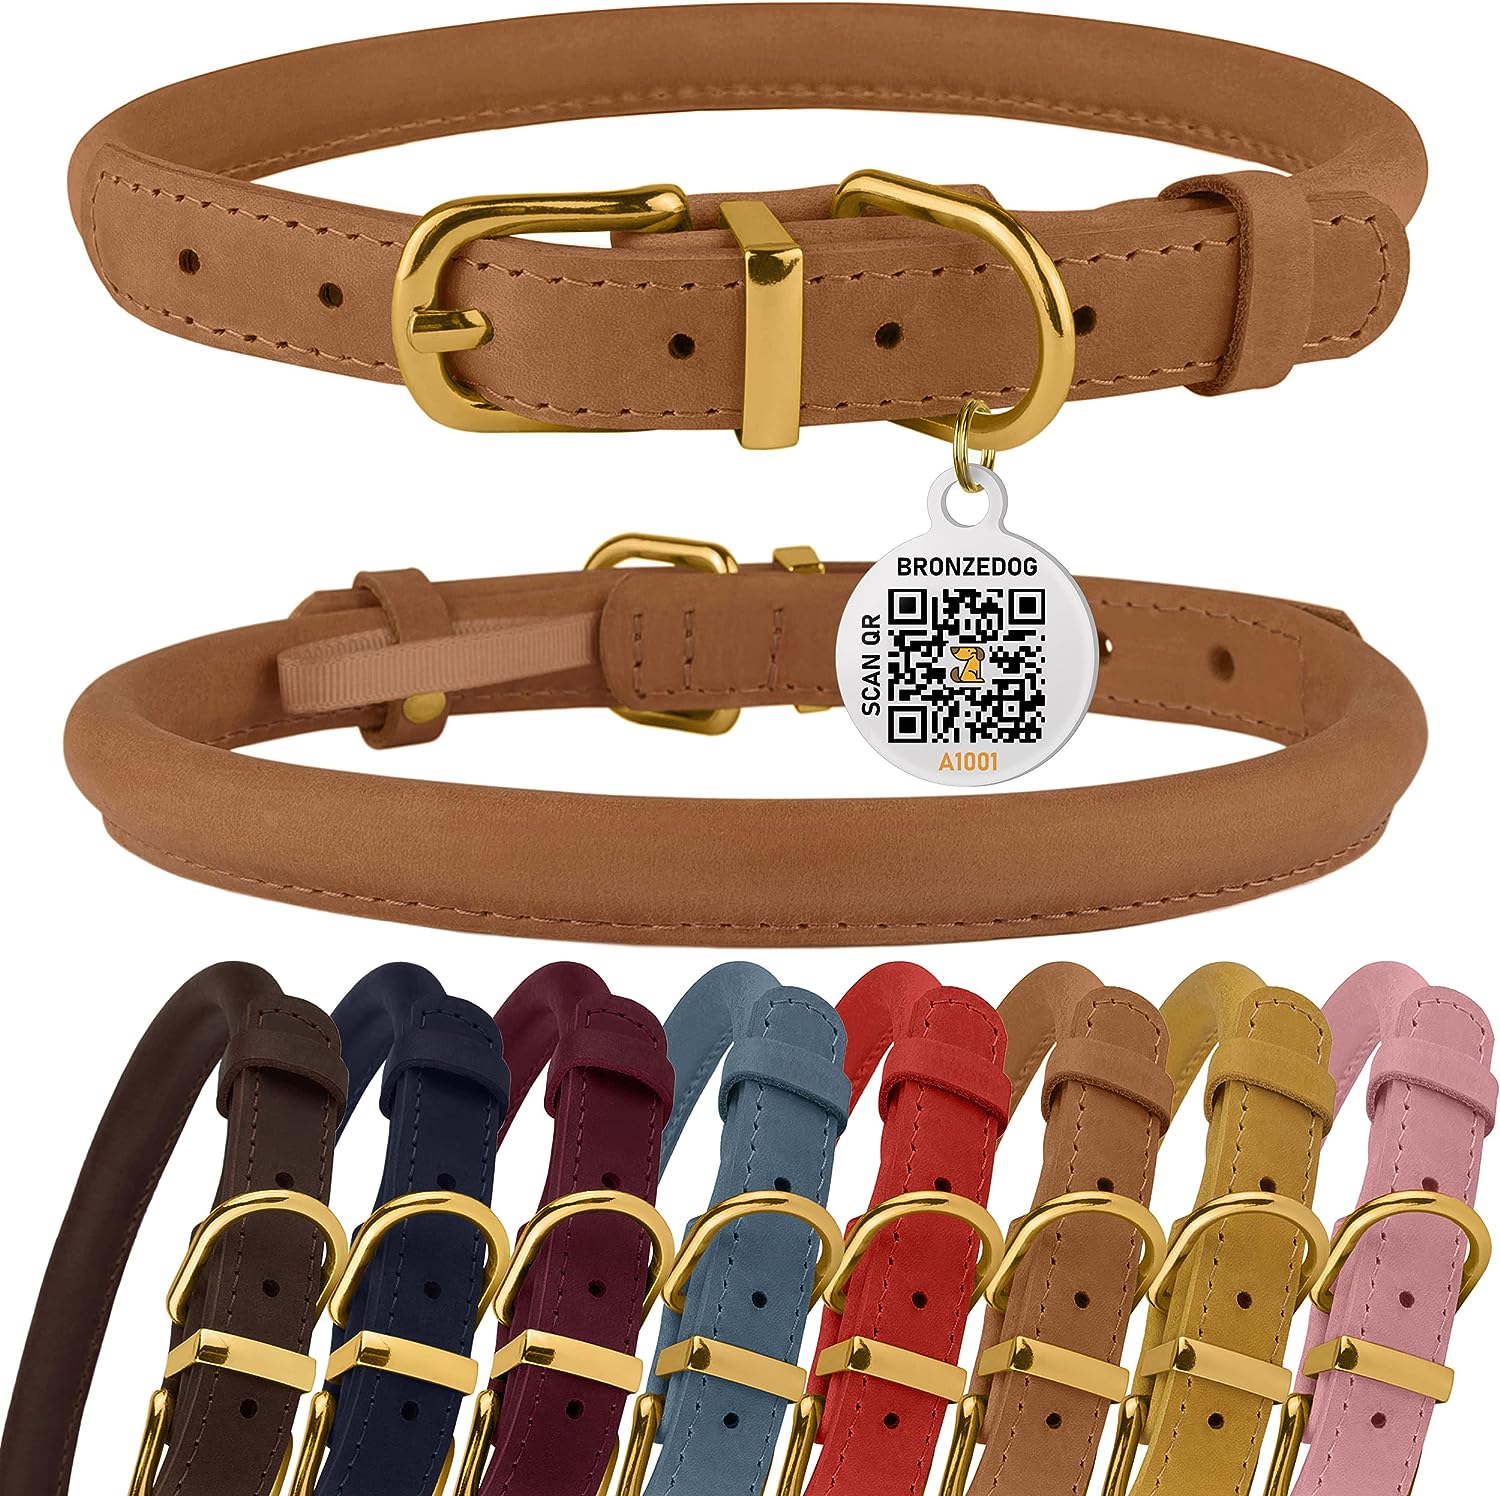 BRONZEDOG Rolled Leather Dog Collar with QR ID Tag